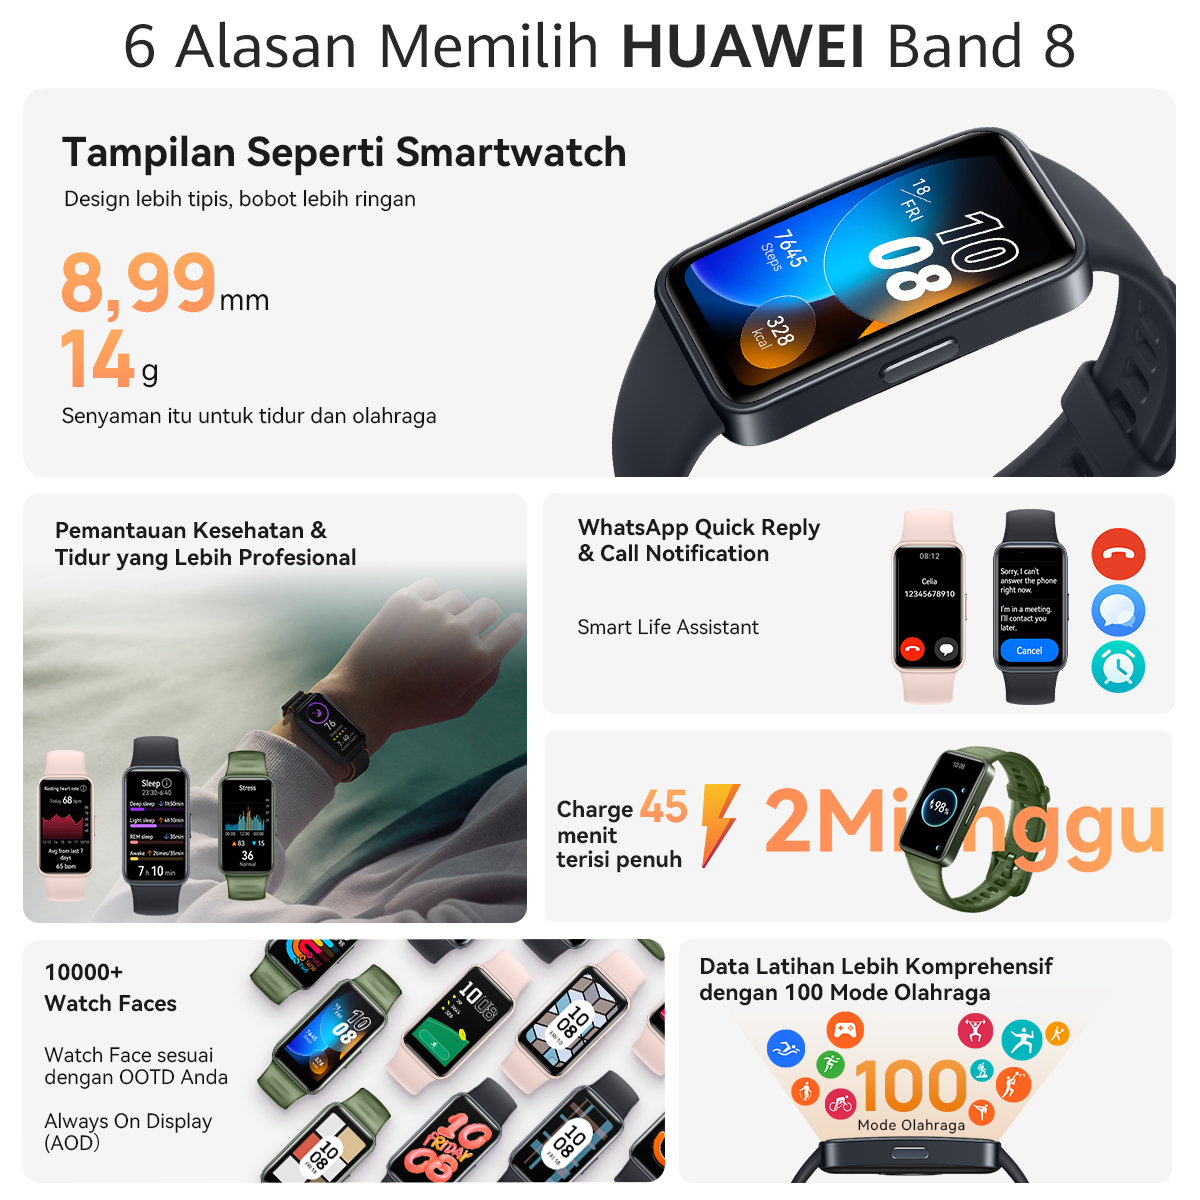 [SOLD OUT] HUAWEI Band 8 Smartband | Smartwatch-like Display | Professional Health & Sleep Monitoring | WhatsApp Quick Reply | Fast Charging | Water Resistance | SpO2 Image 2